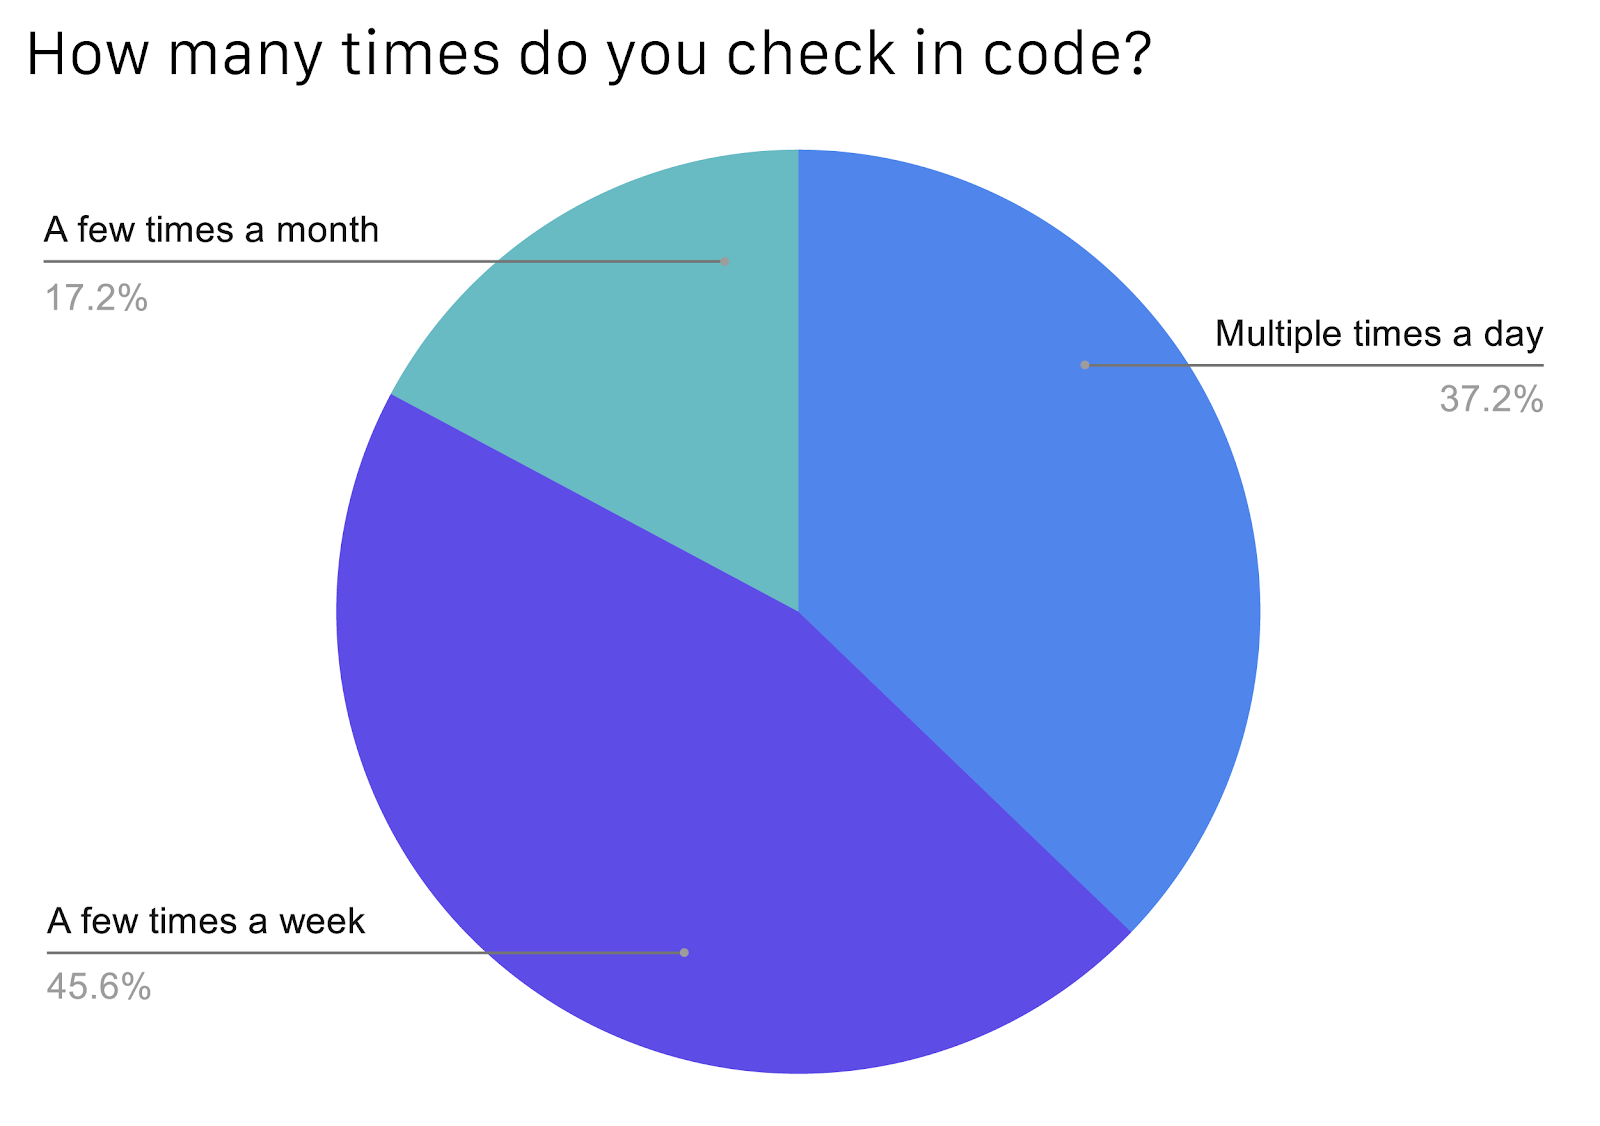 Round chart showing 17.2% respondents check in code for a few times a month, 37.2% multiple times a day, and 45.6% a few times a week